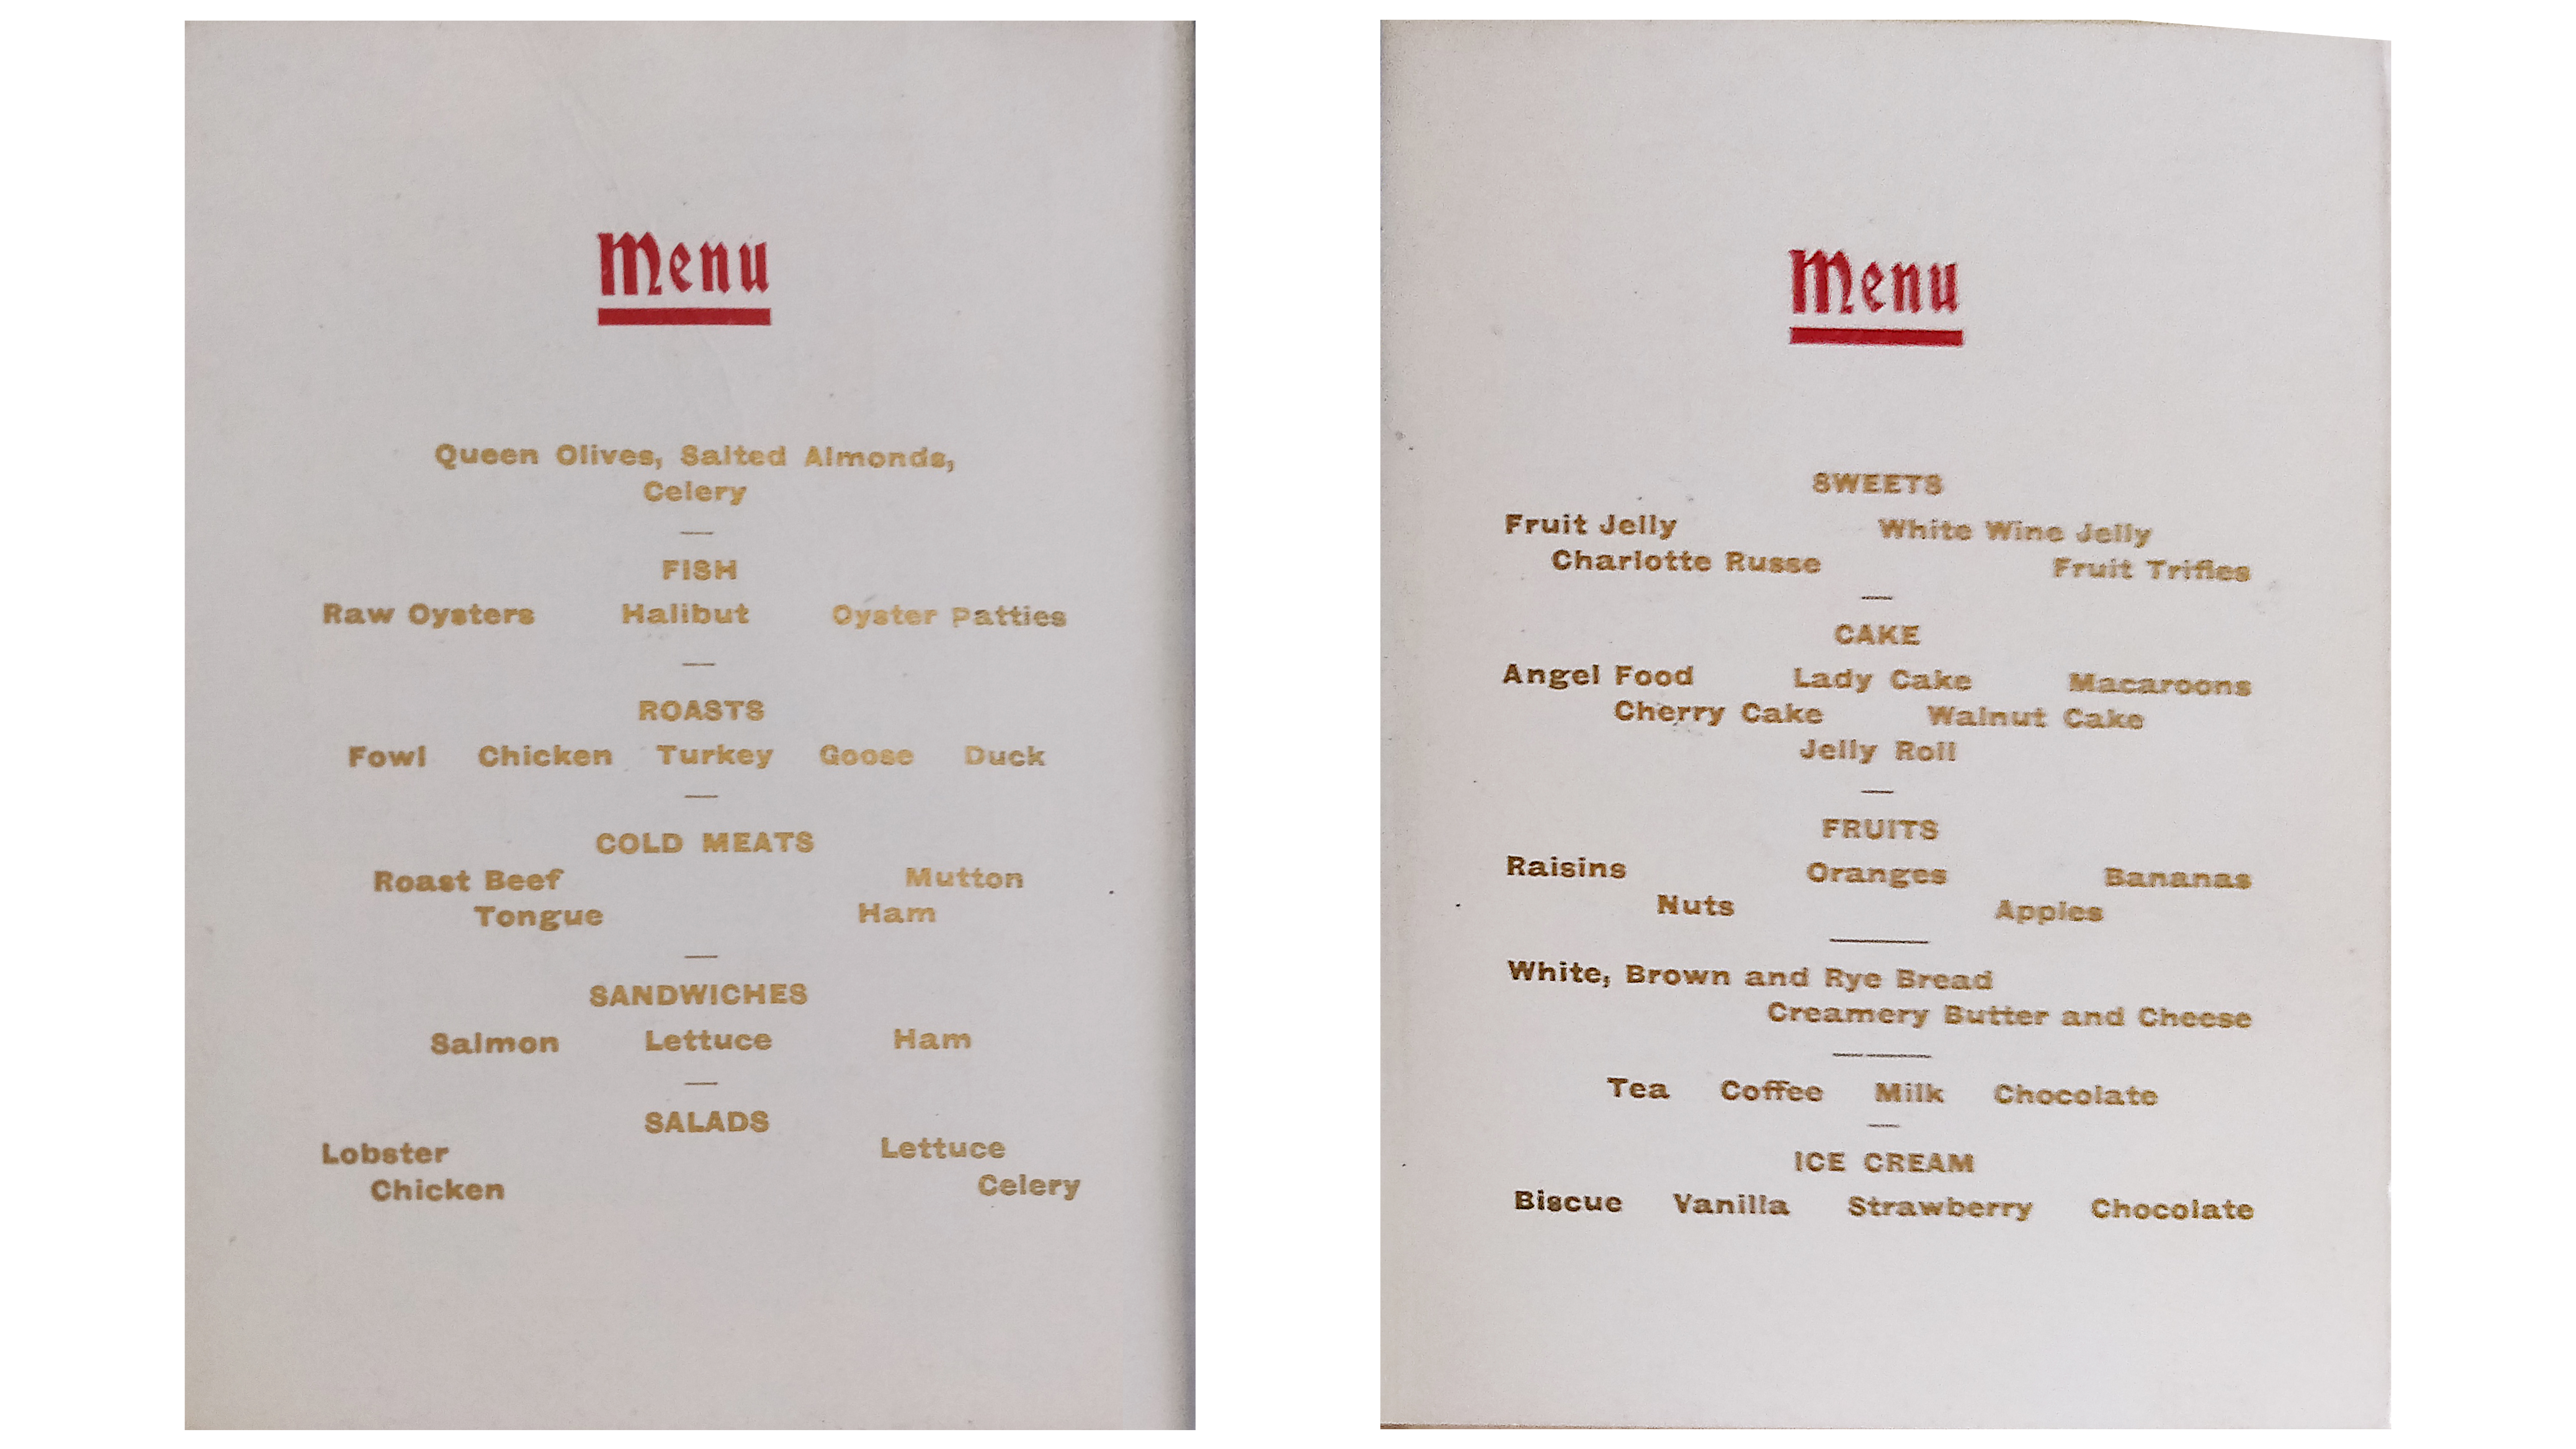 A menu from the Vancouver Fireman's Ball, 1904.